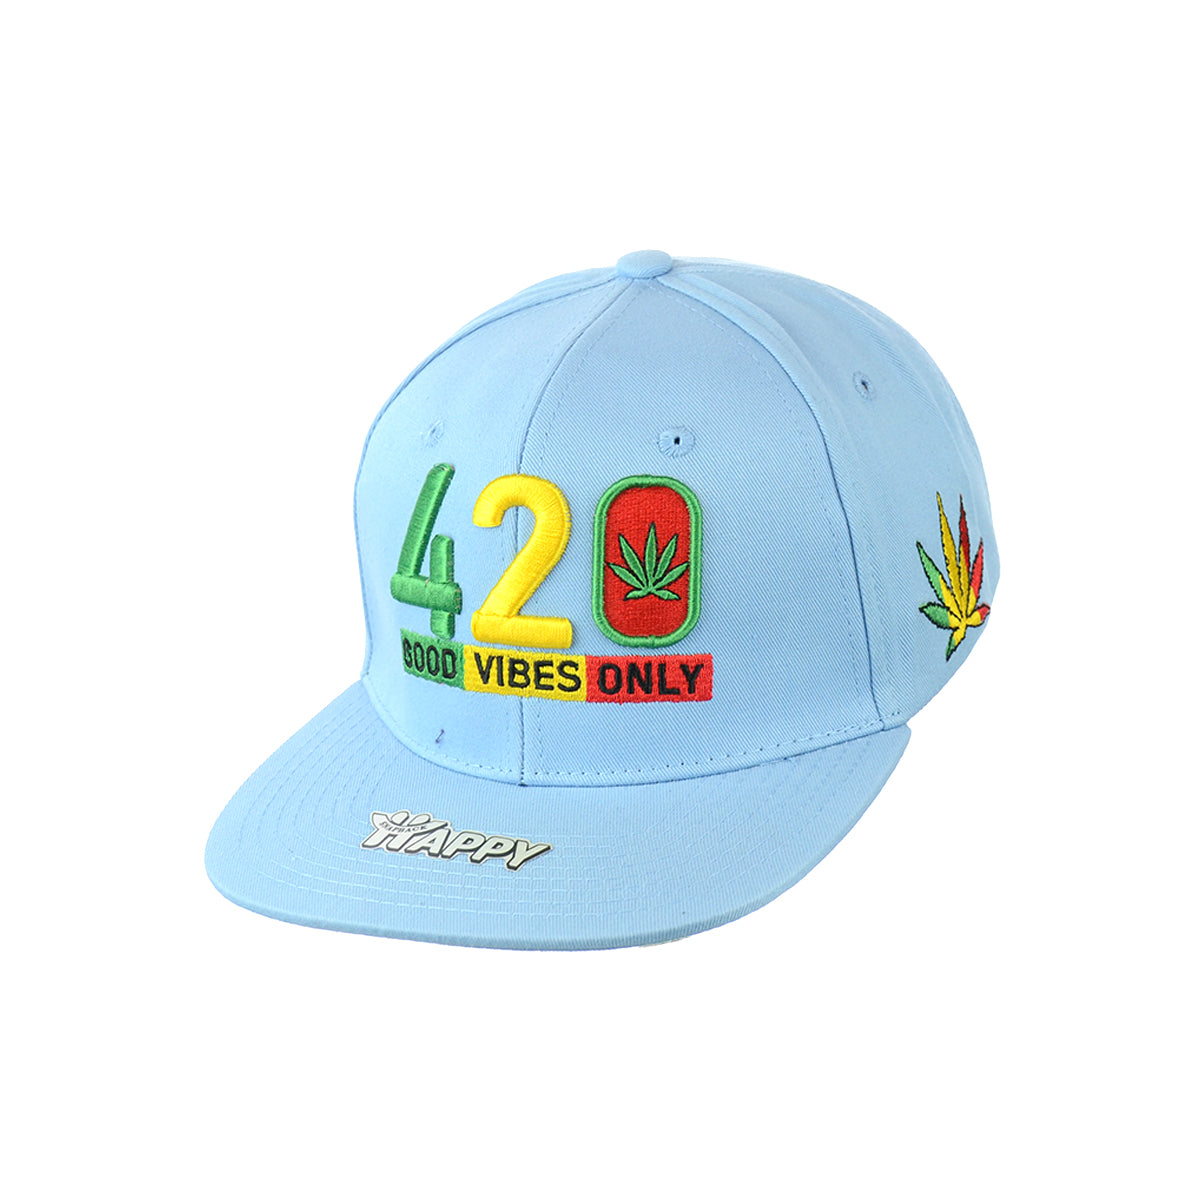 420 Good Vibes Only Embroidered Snapback Hat 100% Cotton